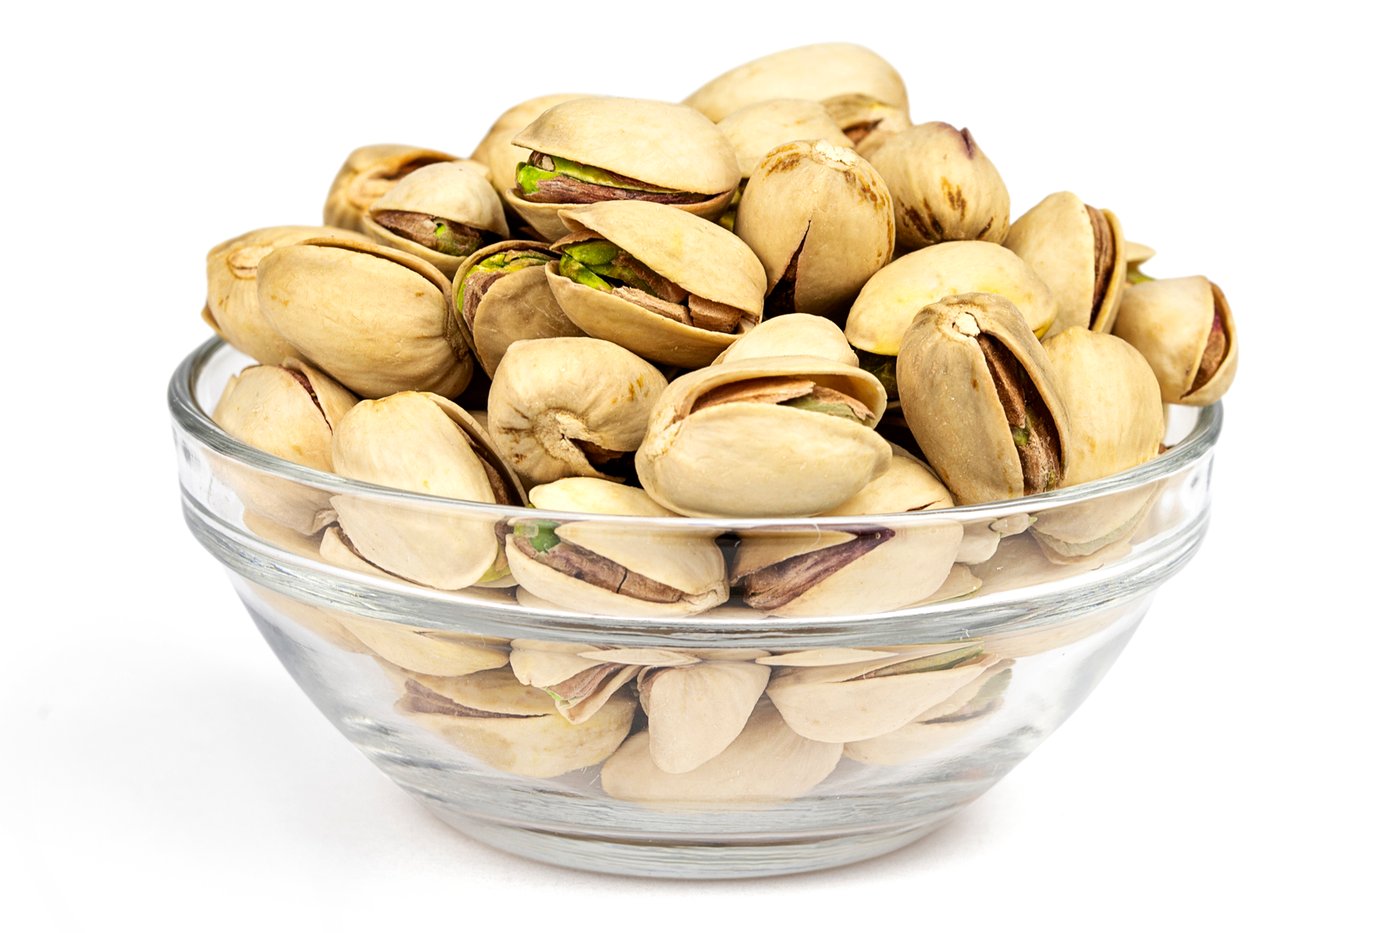 Roasted Pistachios (Unsalted, In Shell) image zoom